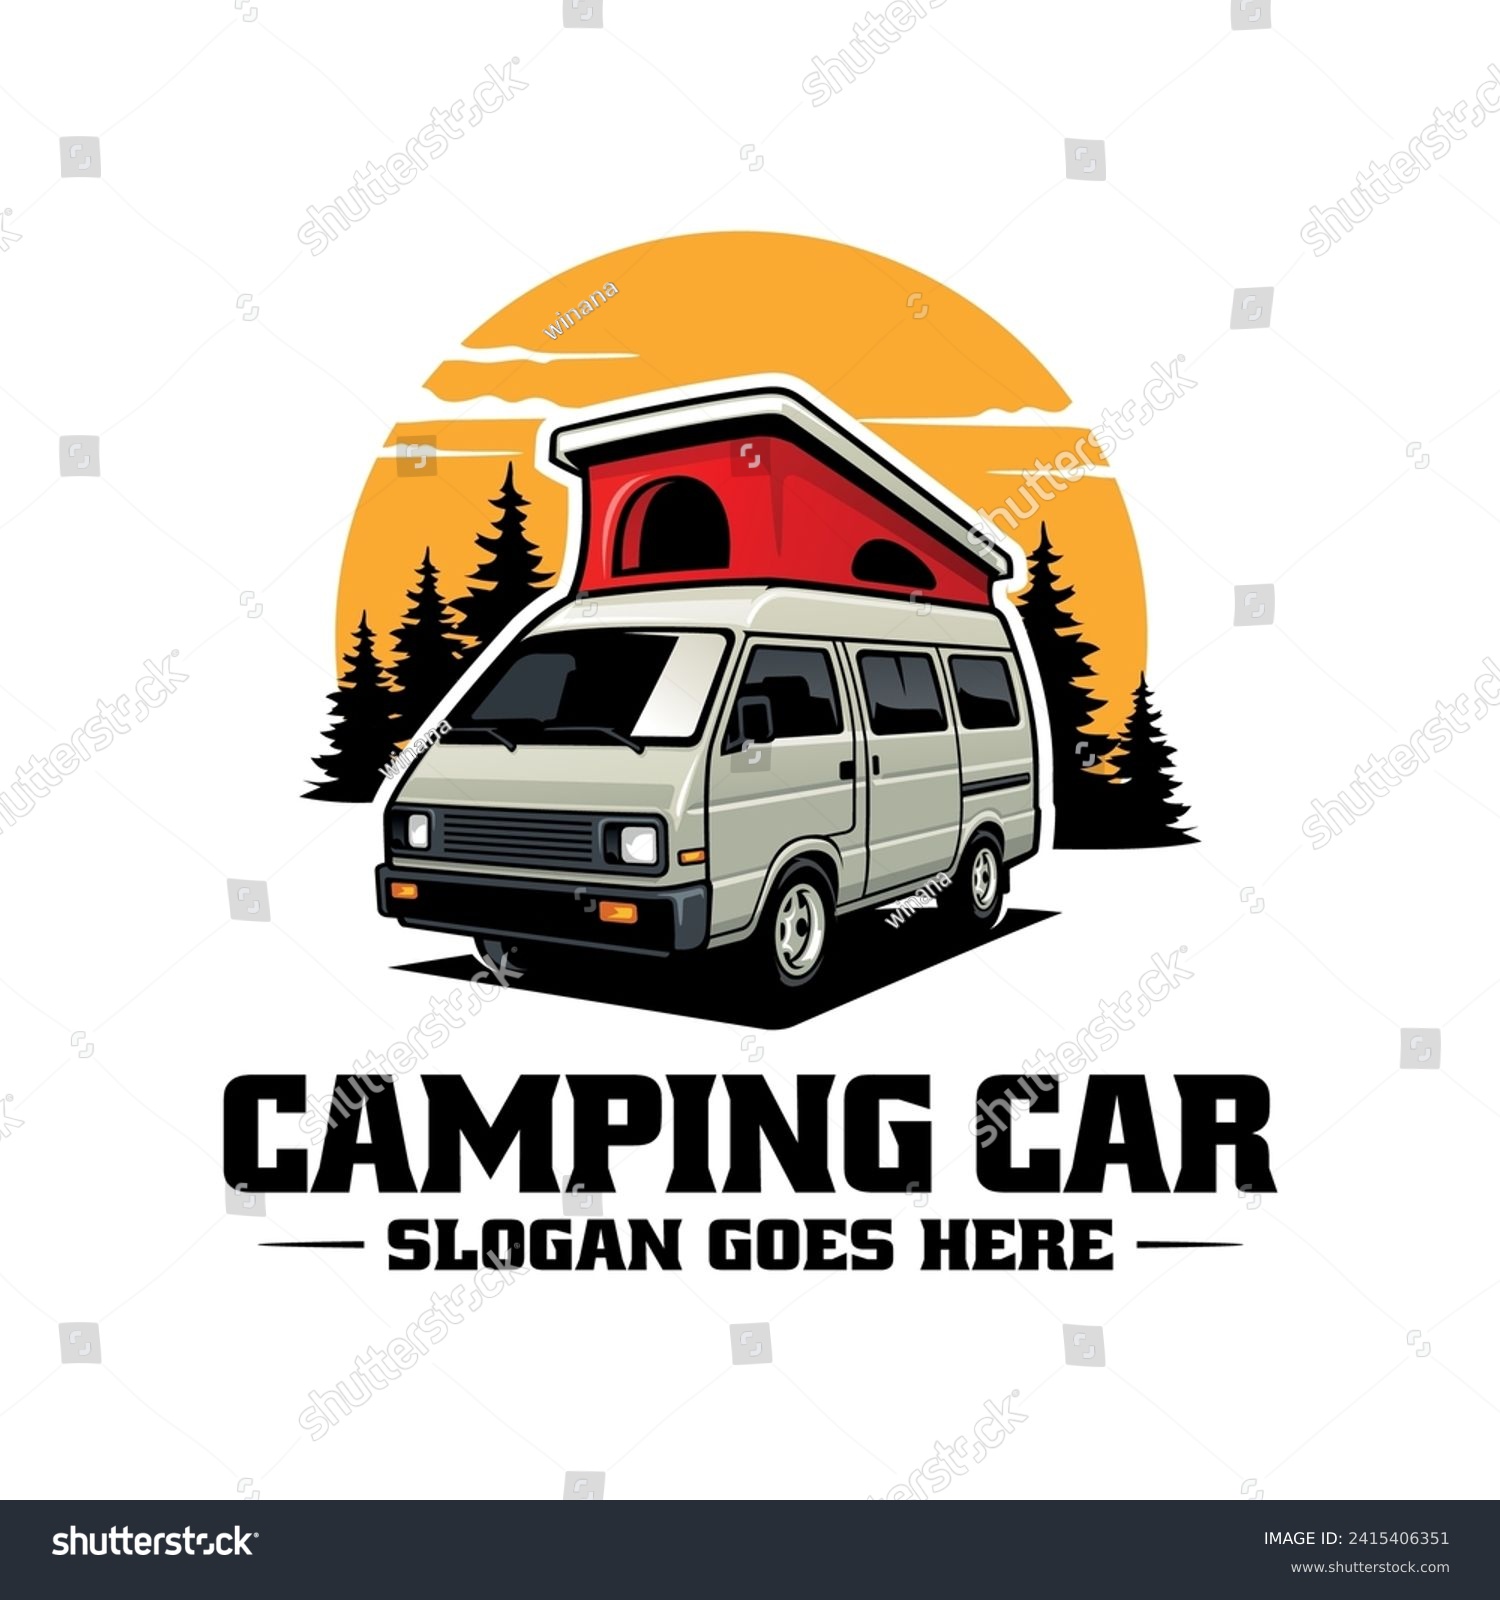 SVG of camping car with roof tent illustration logo vector svg